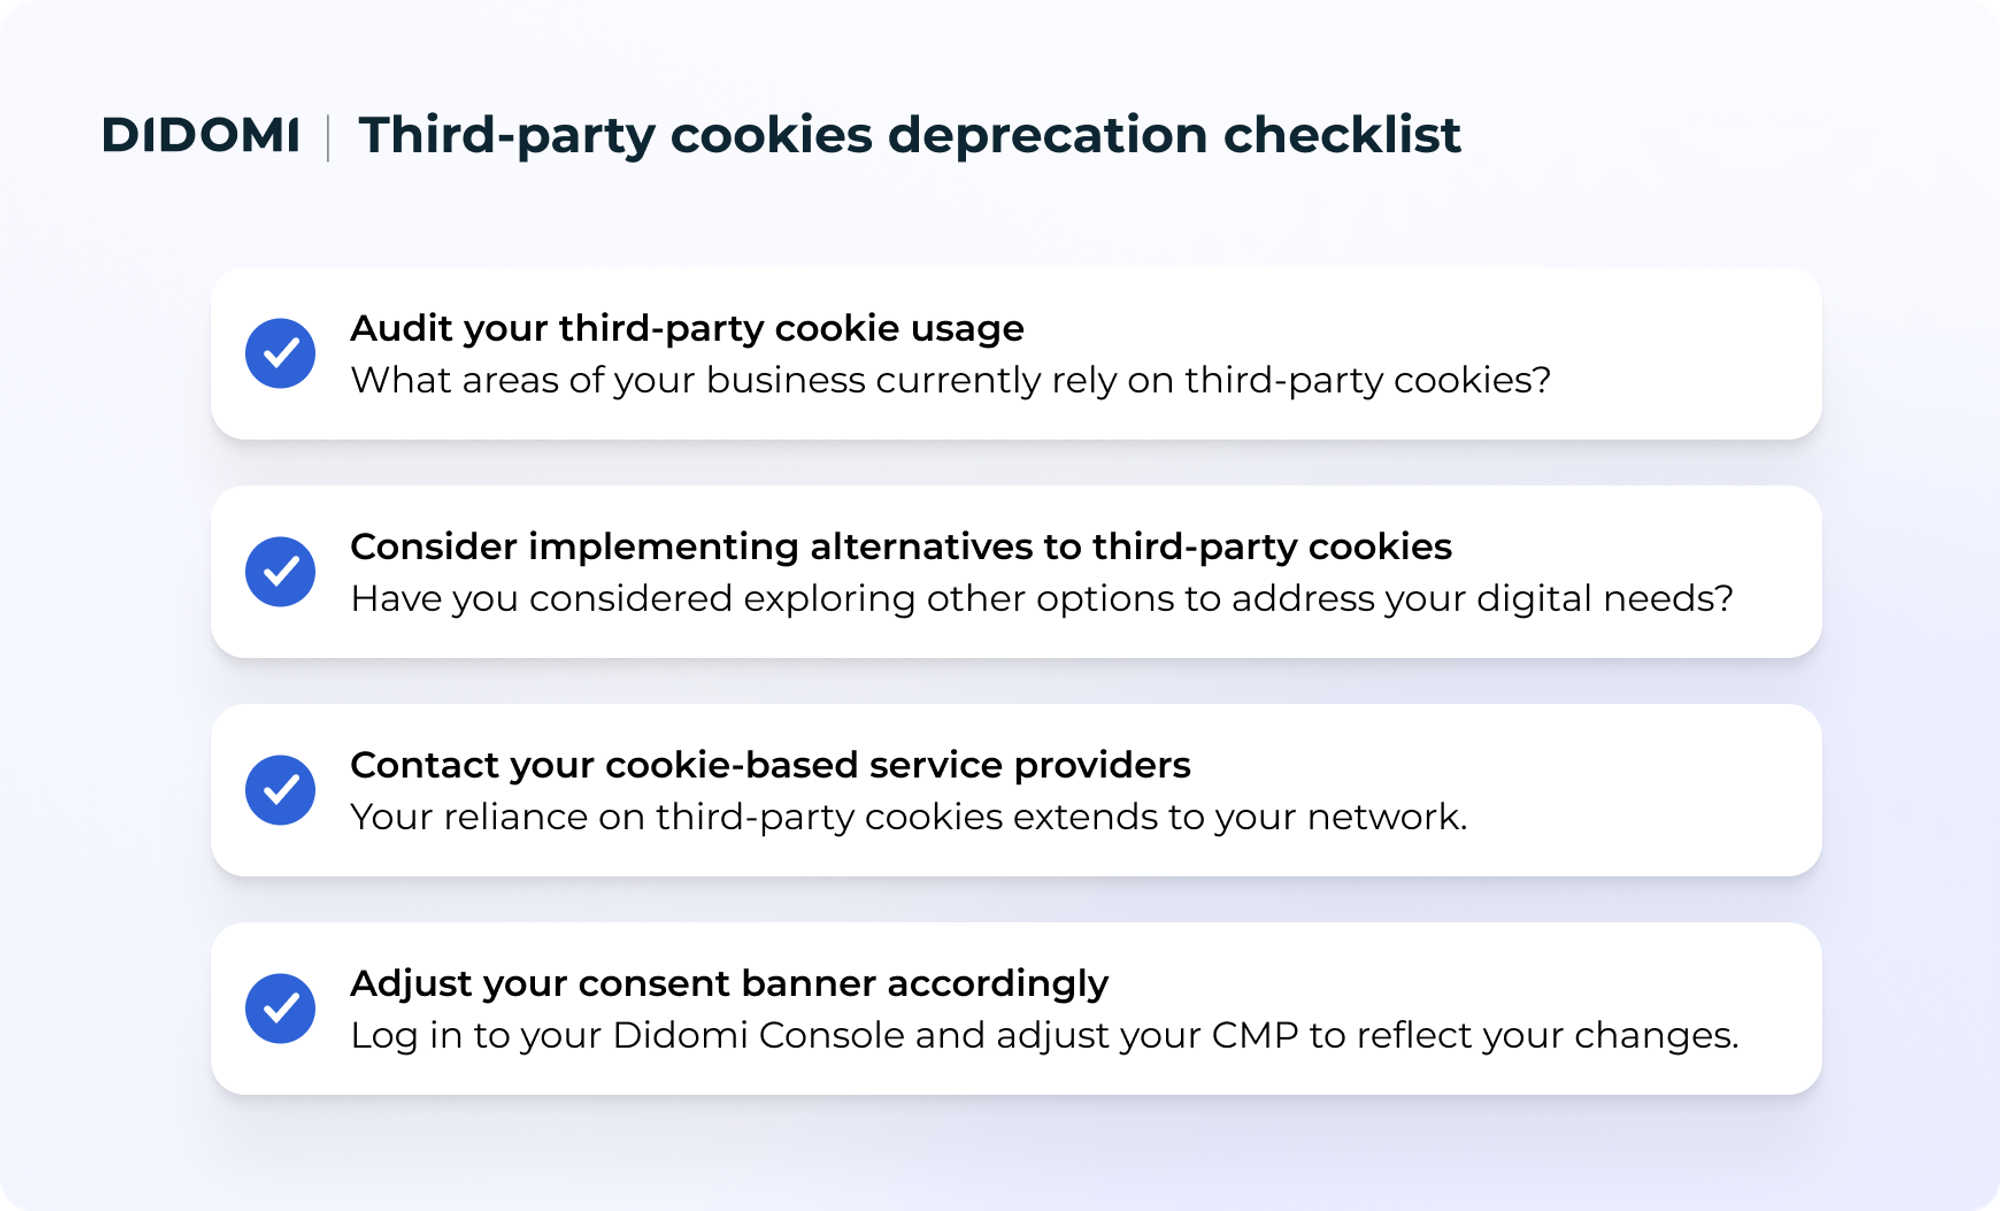 Checklist of what users can do to prepare for the third party cookie deprecation. Audit your third party cookie usage, consider implementing alternatives to third-party cookies, contact your cookie-based service providers, and adjust your consent banner